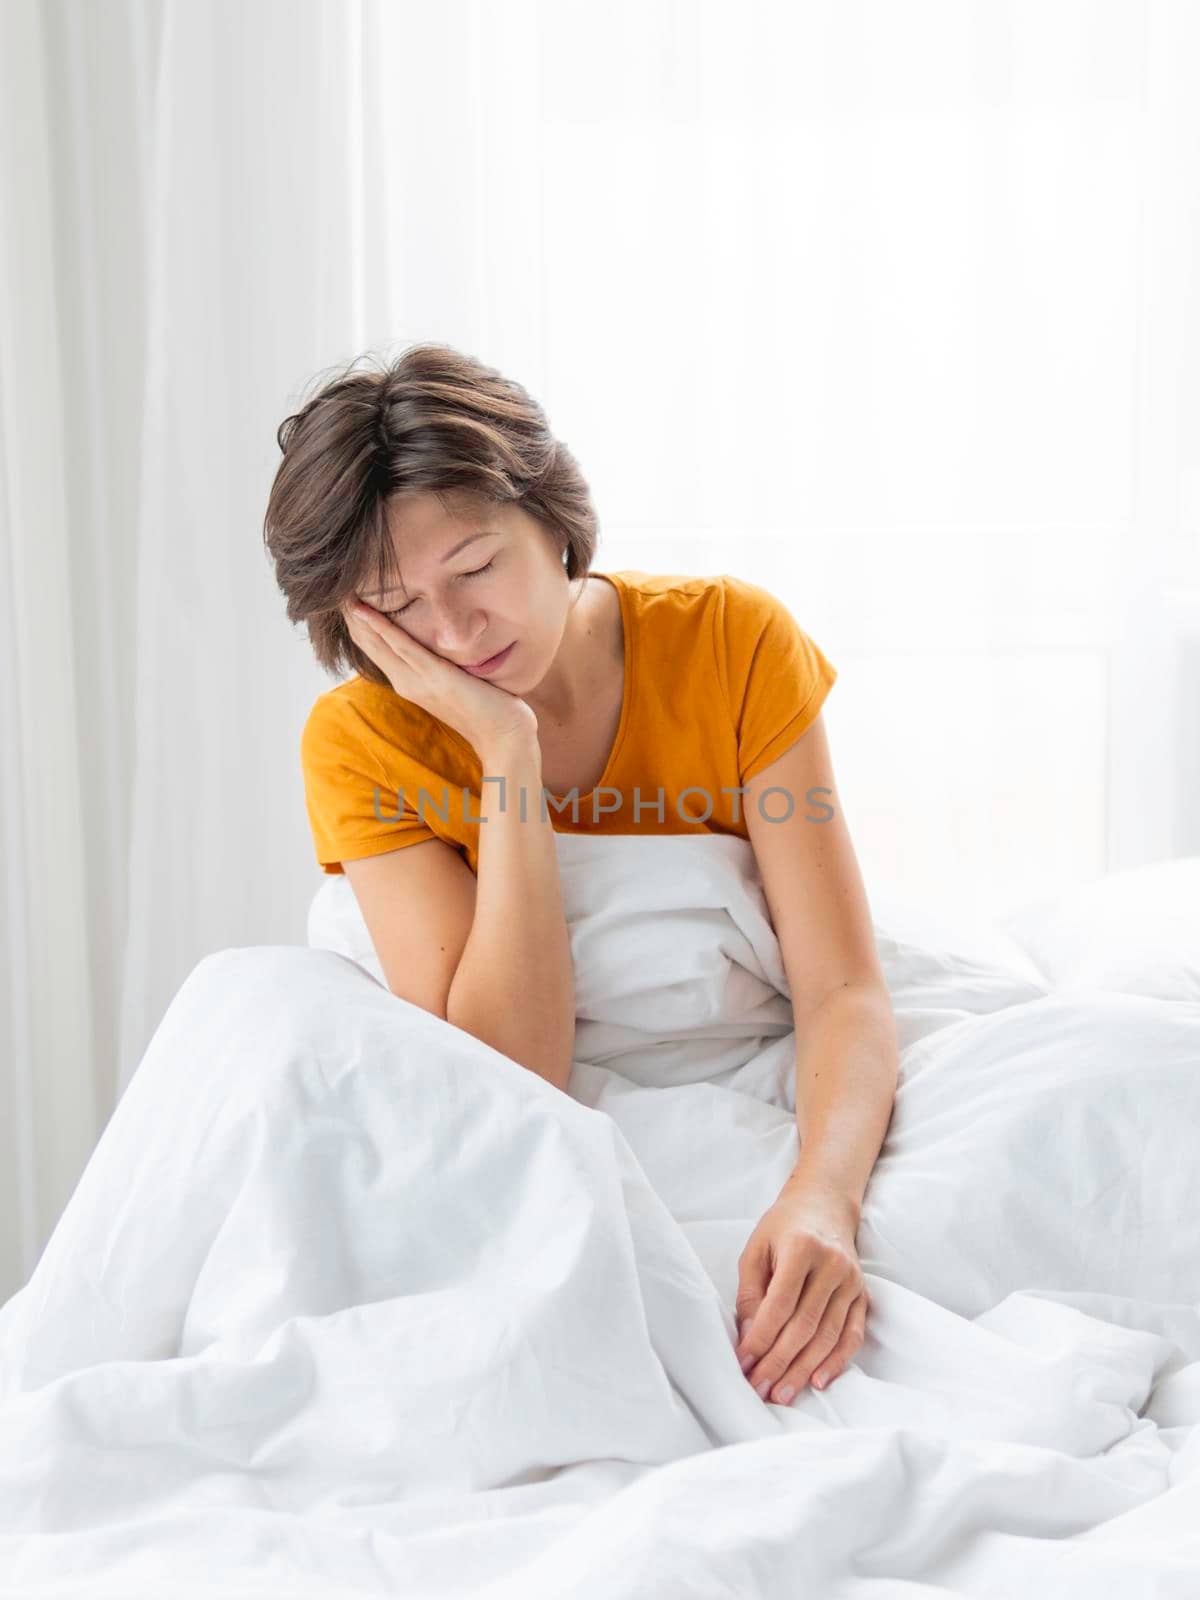 Sleepy woman is sitting in bed, completely covered with white blanket. It's hard to wake up early in morning. Woman does not get enough sleep.